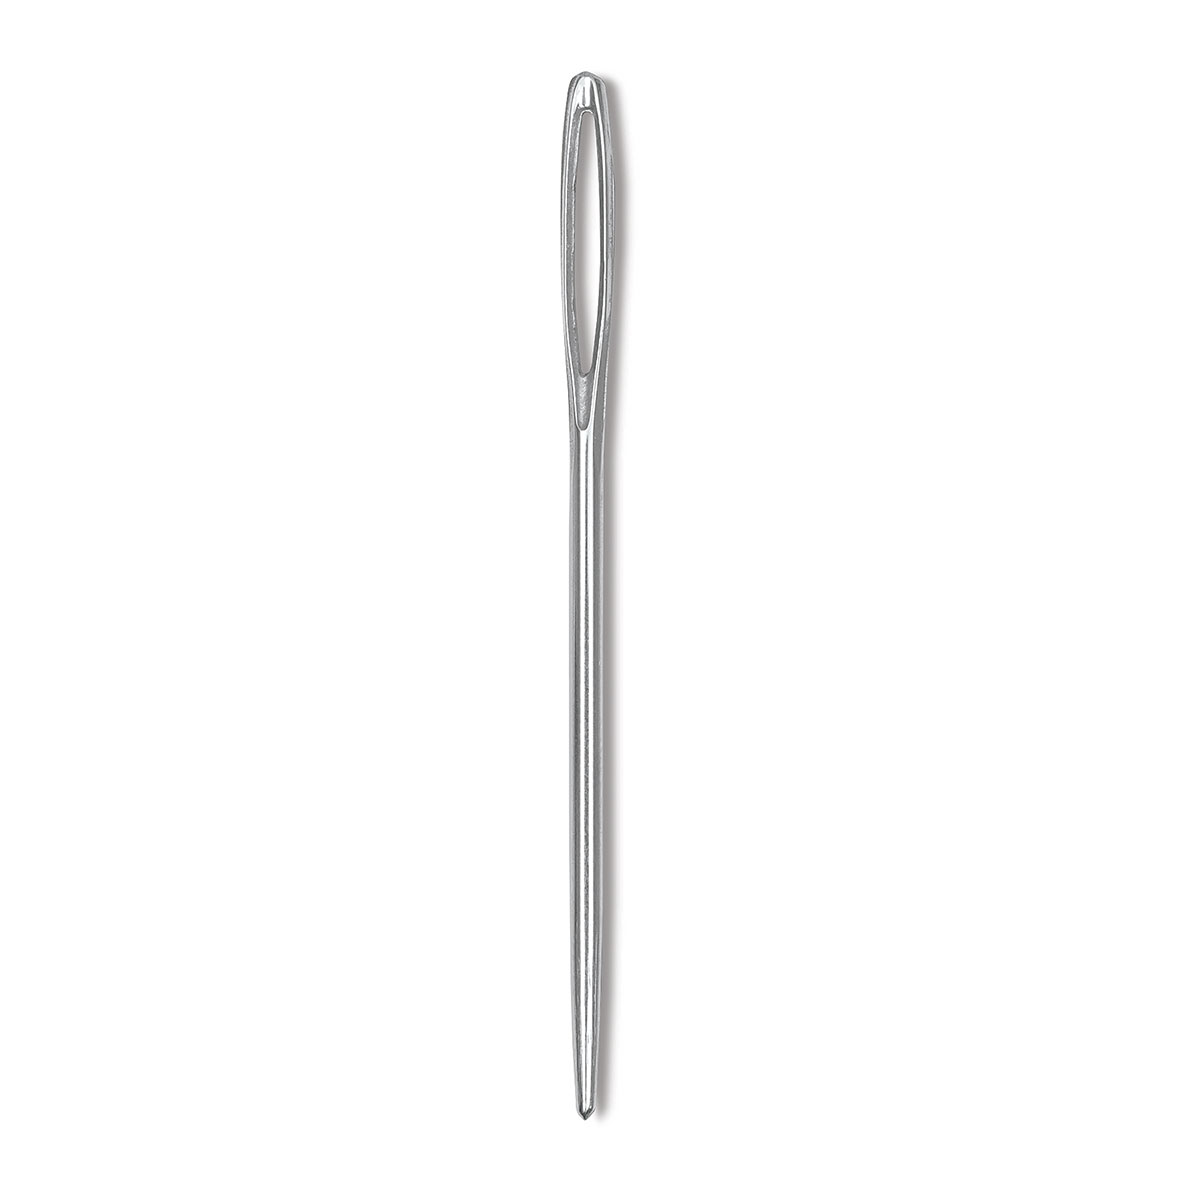 Blunt Tapestry Needle -Size #18, 2 Long, Pkg of 12